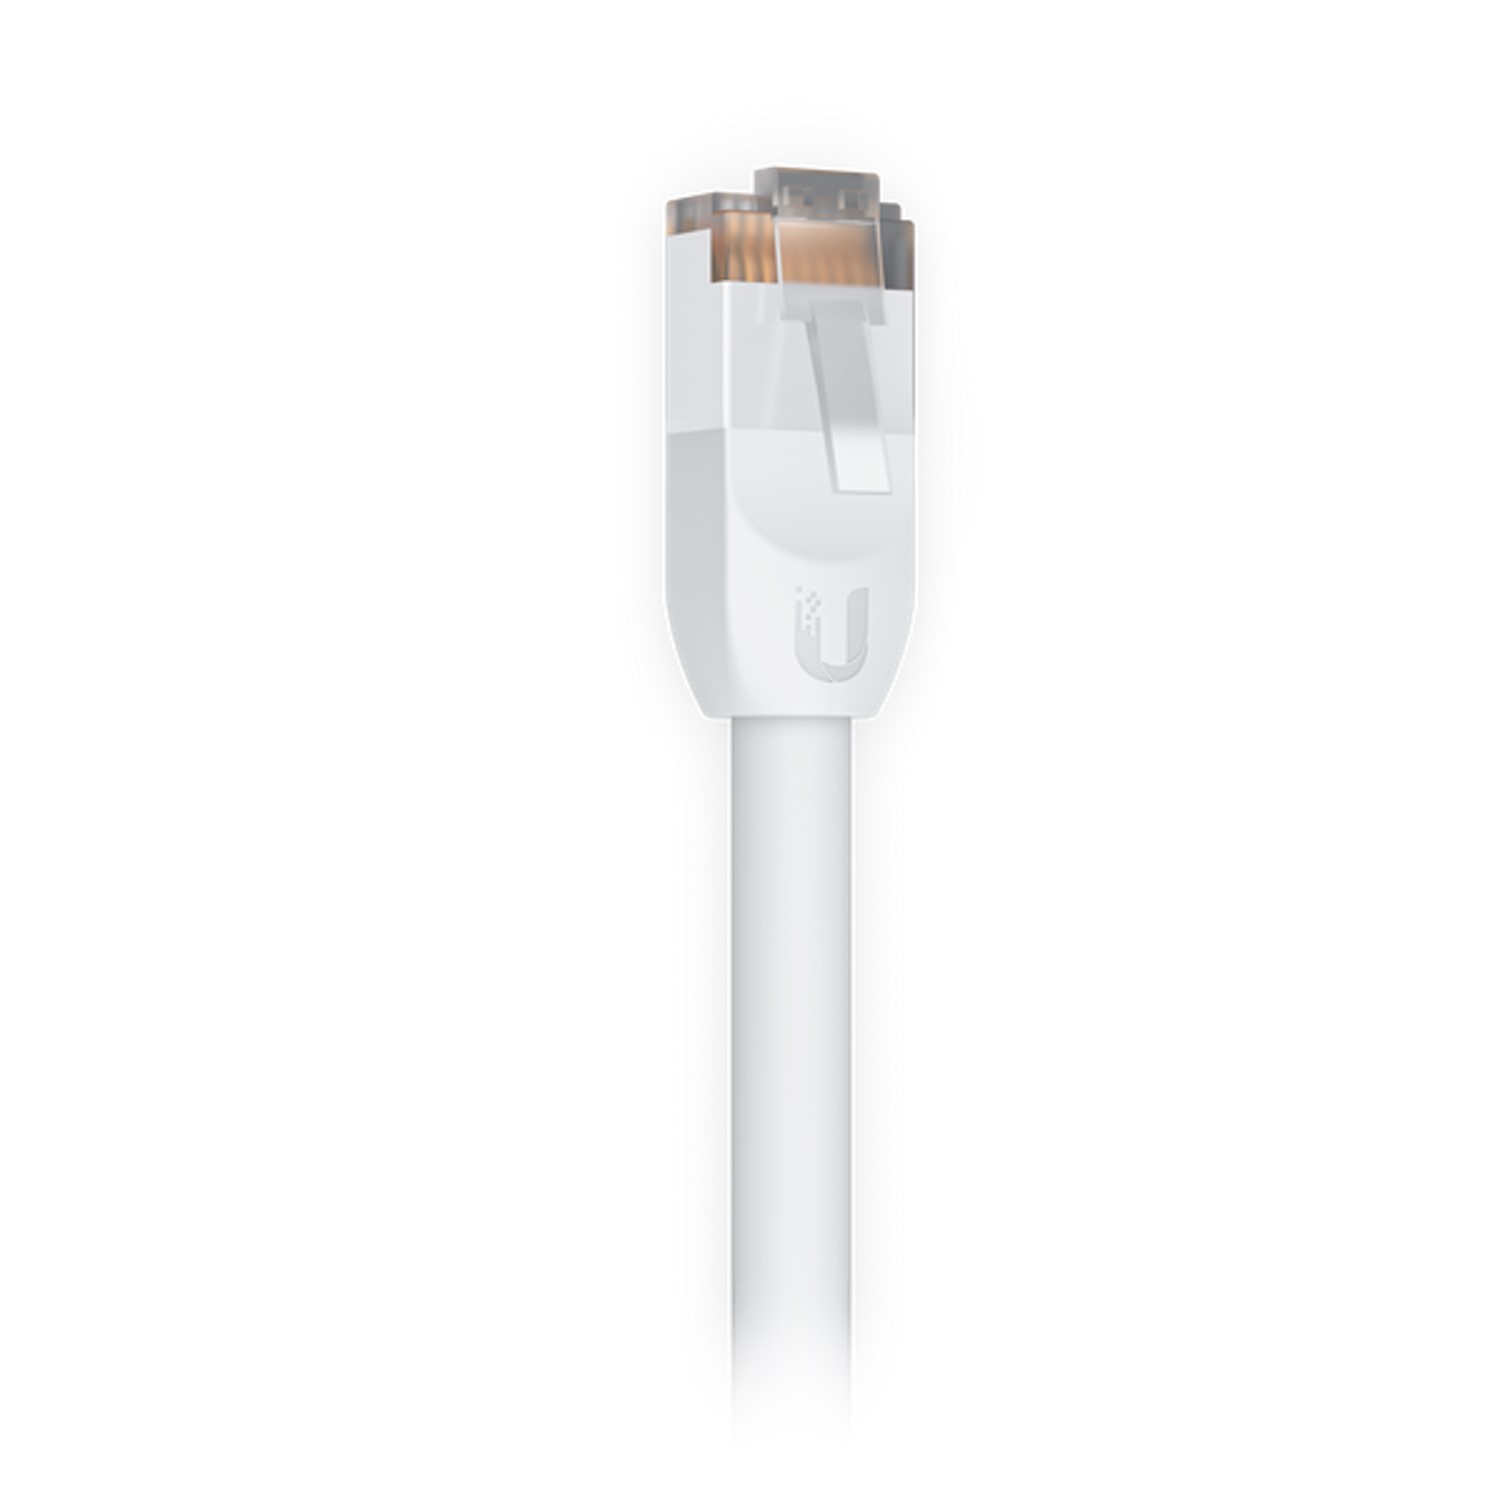 Ubiquiti UniFi Patch Cable Outdoor 3M White, Single Unit, All-weather, RJ45 Ethernet Cable, Category 5e, Incl 2Yr Warr